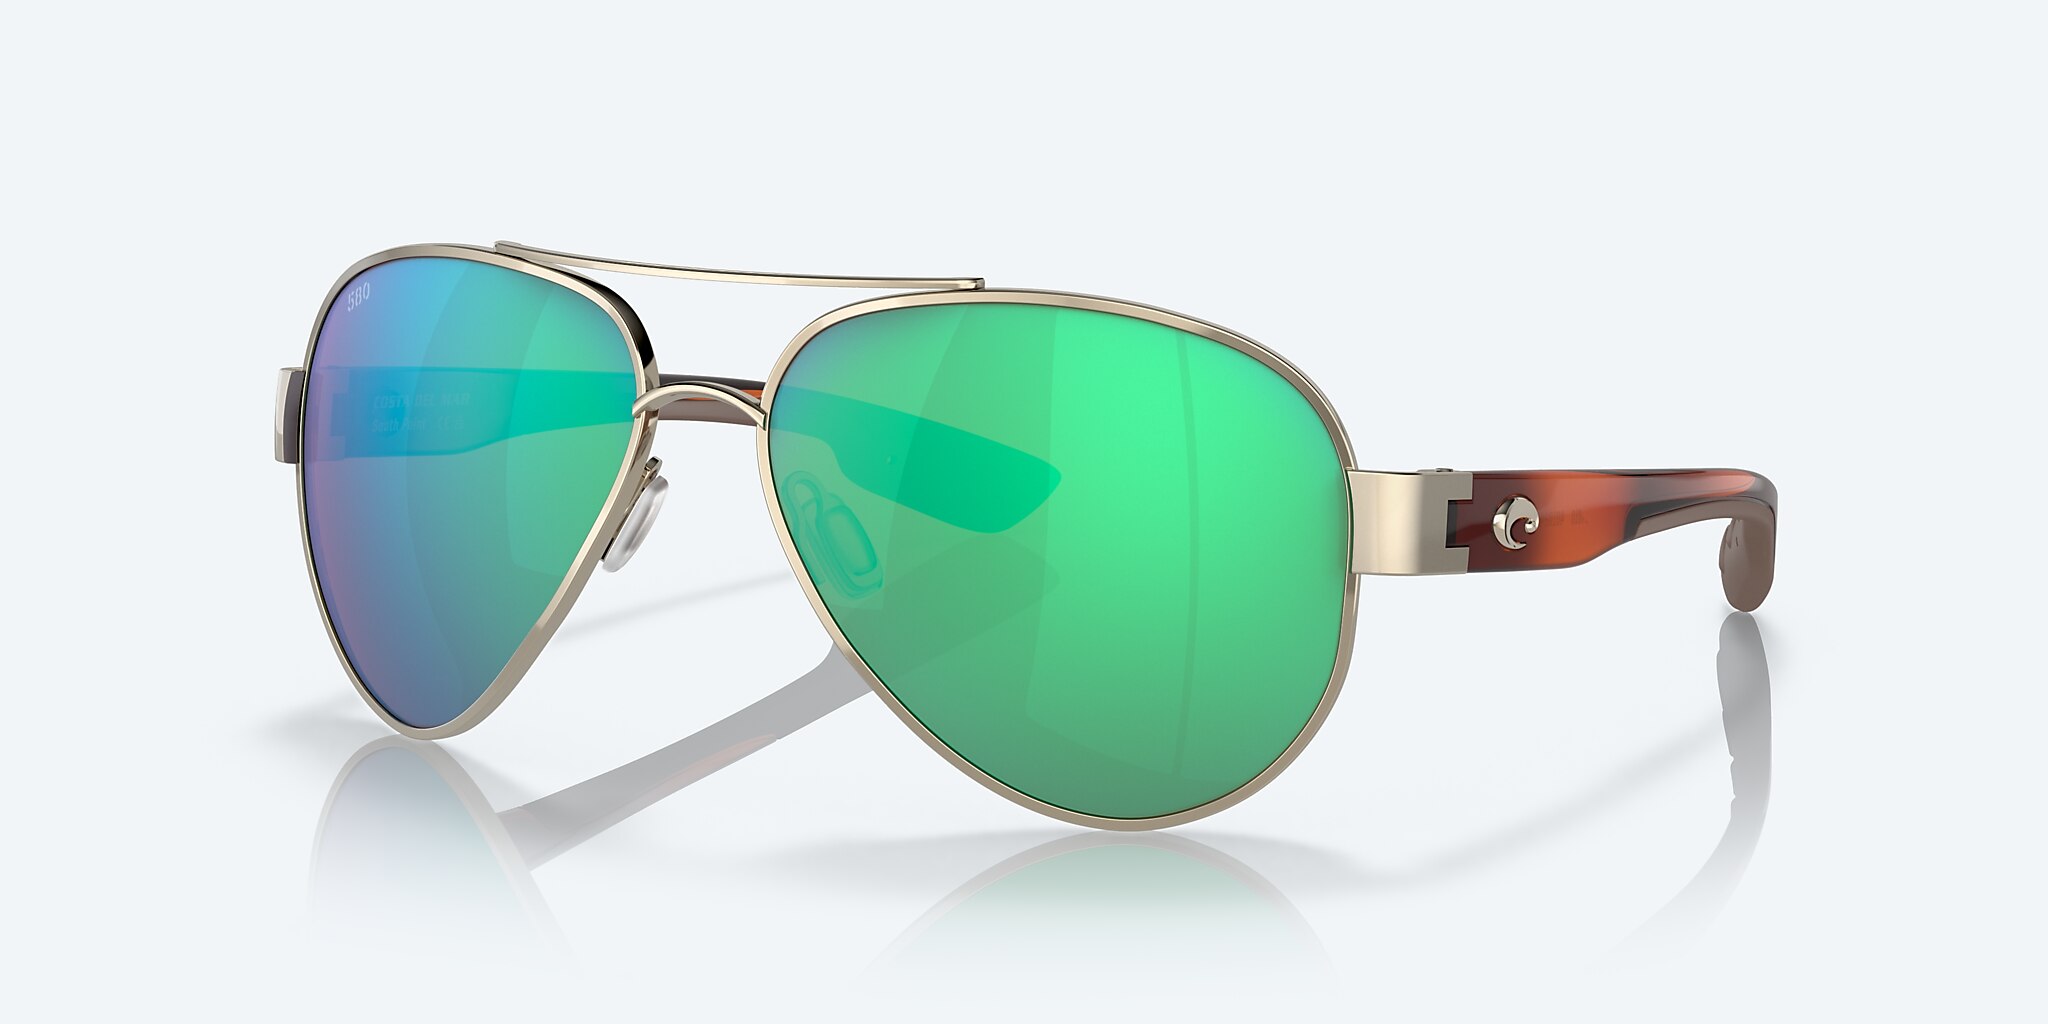 South Point Polarized Sunglasses in Green Mirror